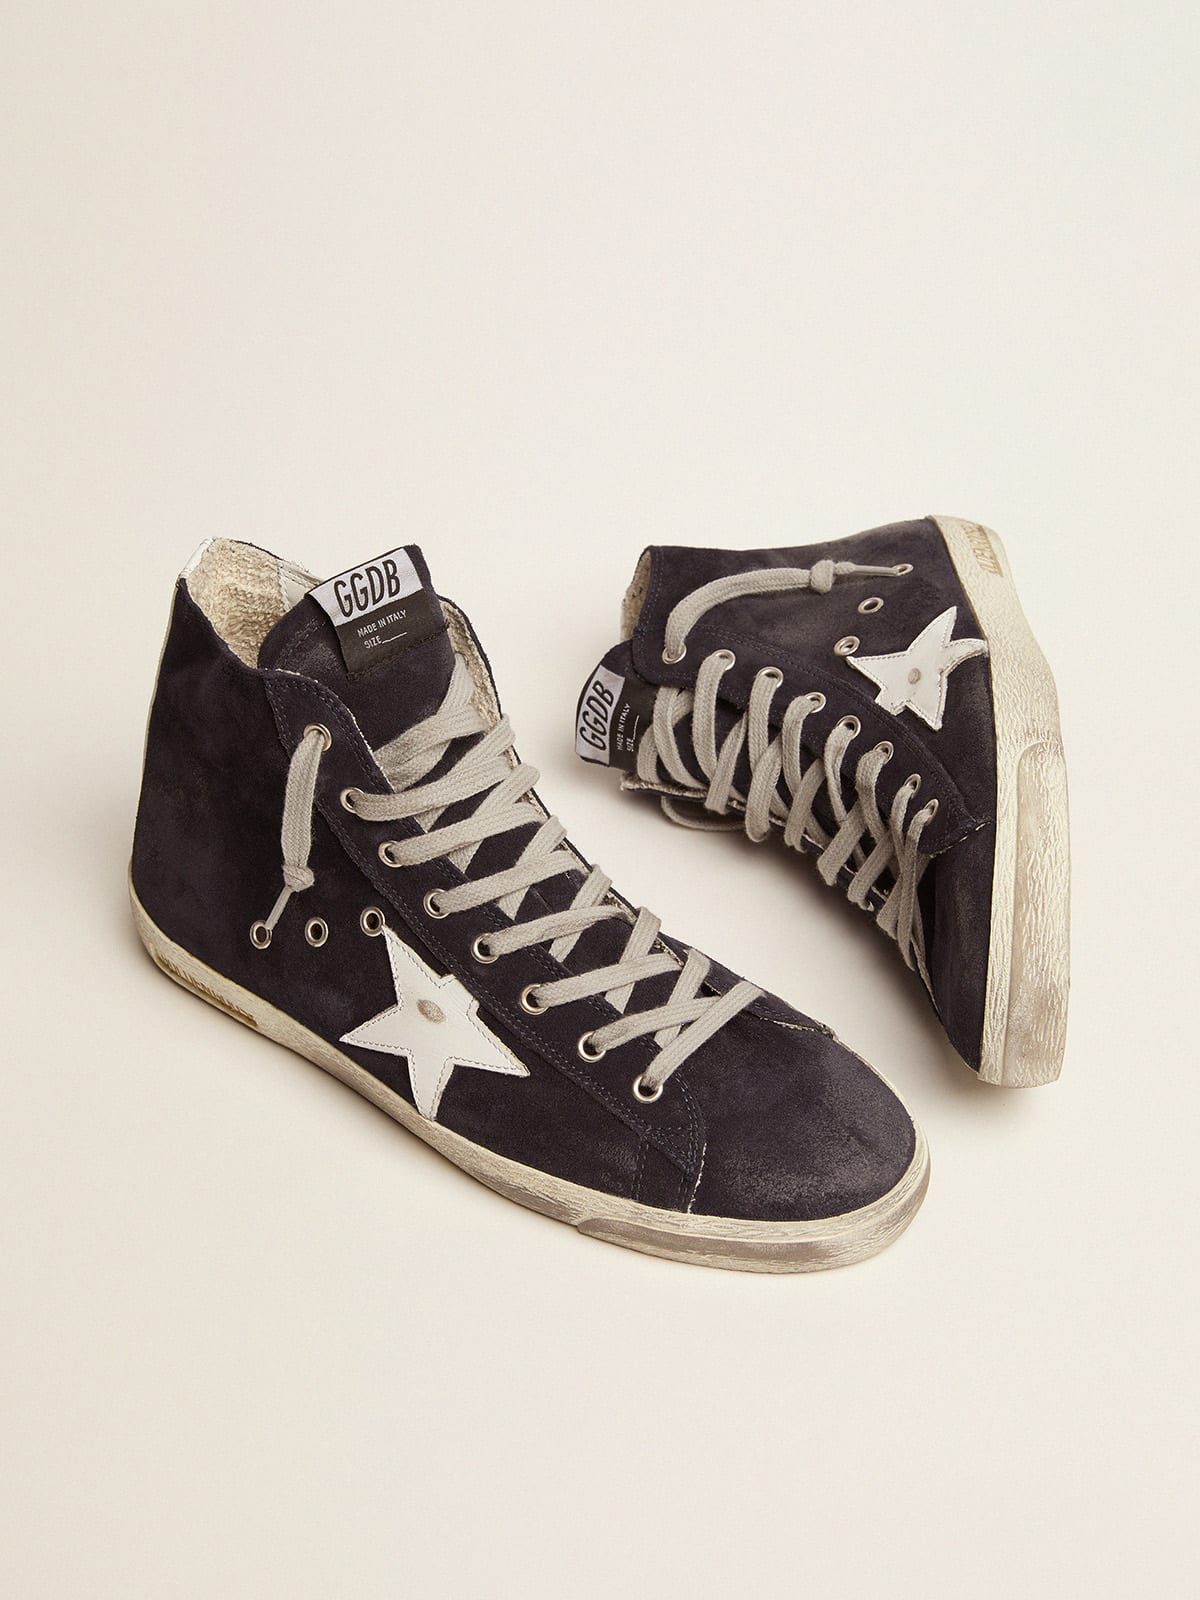 Golden Goose - Francy sneakers in leather with leather star and heel tab in 